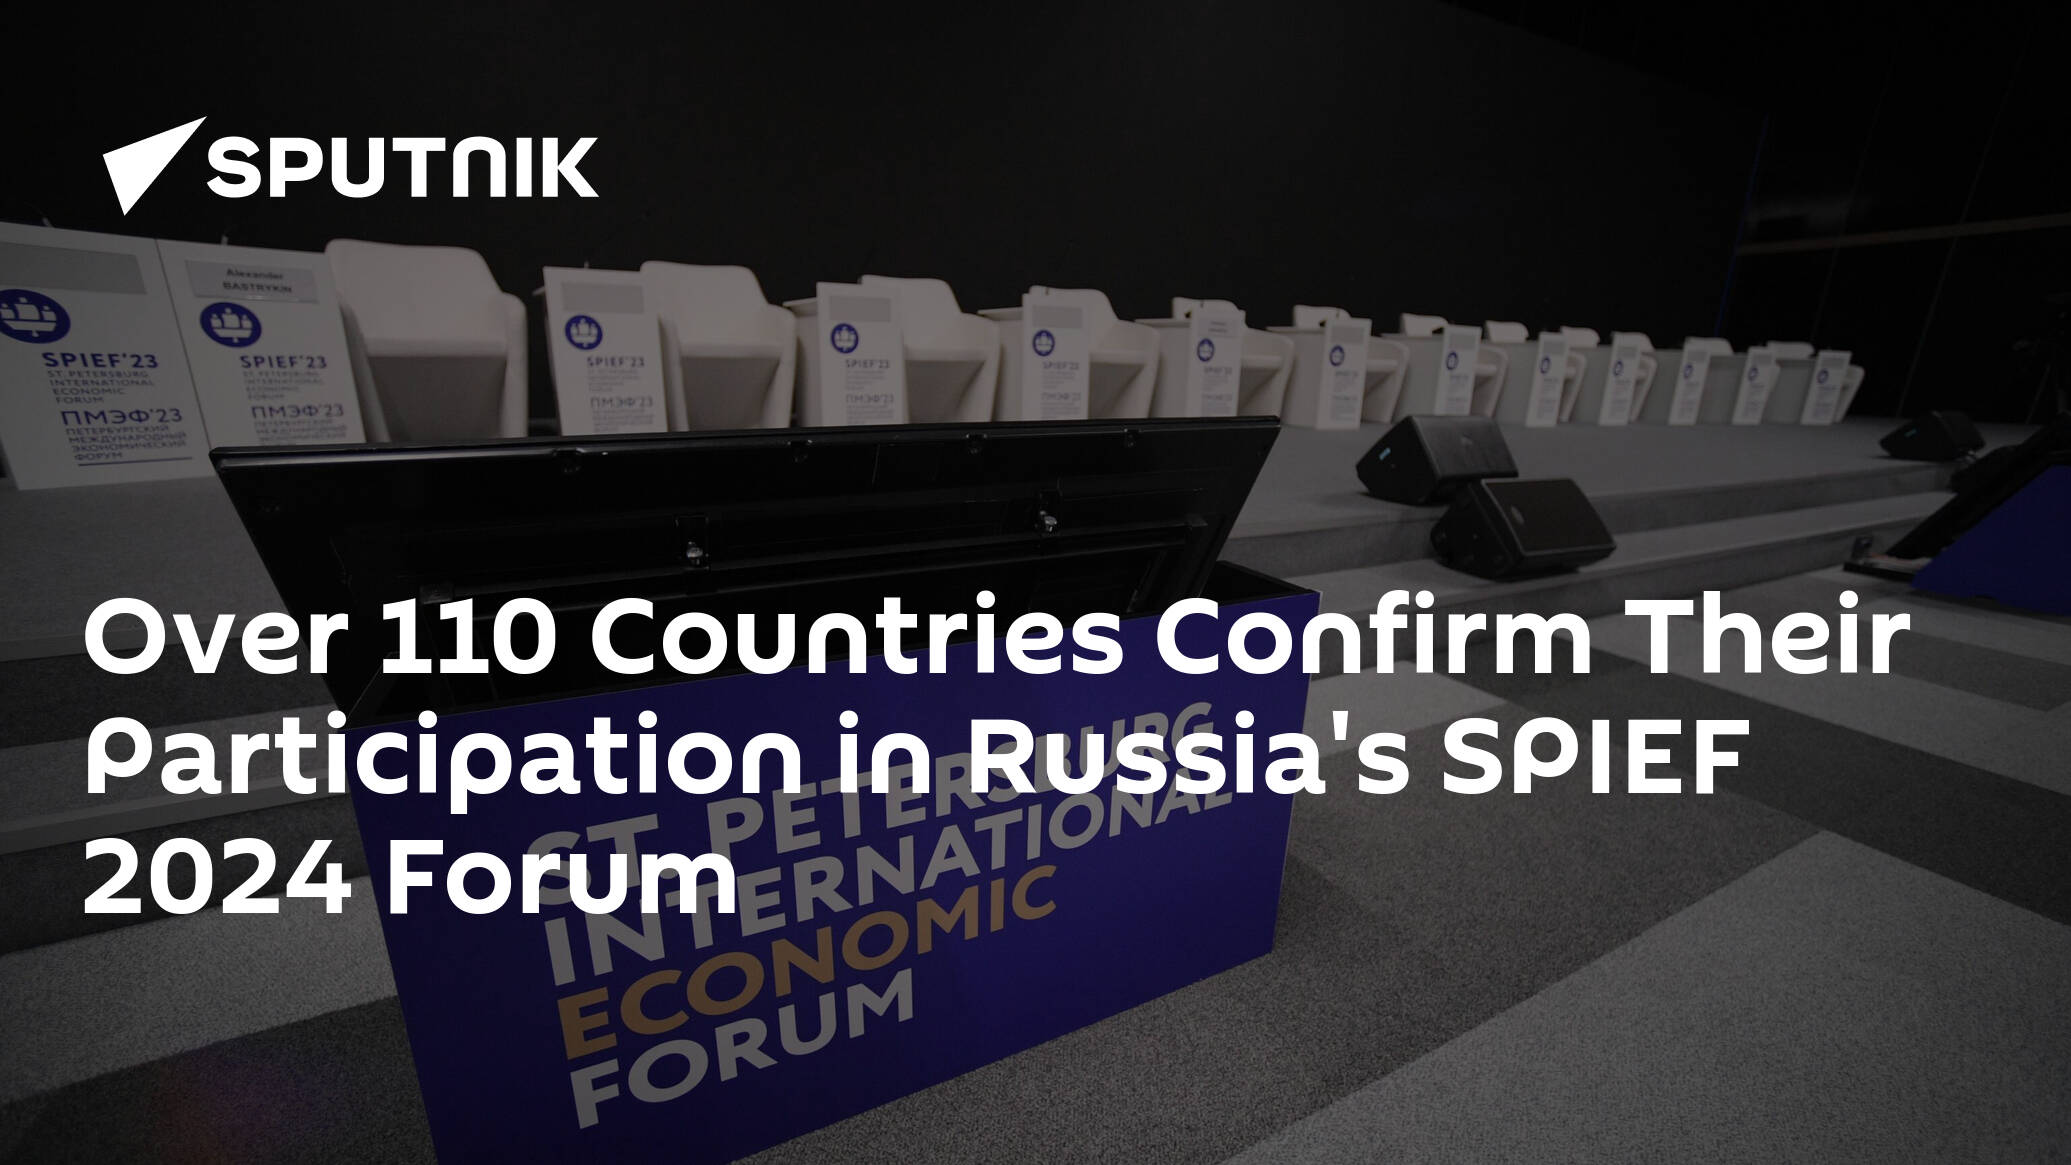 Over 110 Countries Confirm Their Participation in Russia's SPIEF 2024 Forum